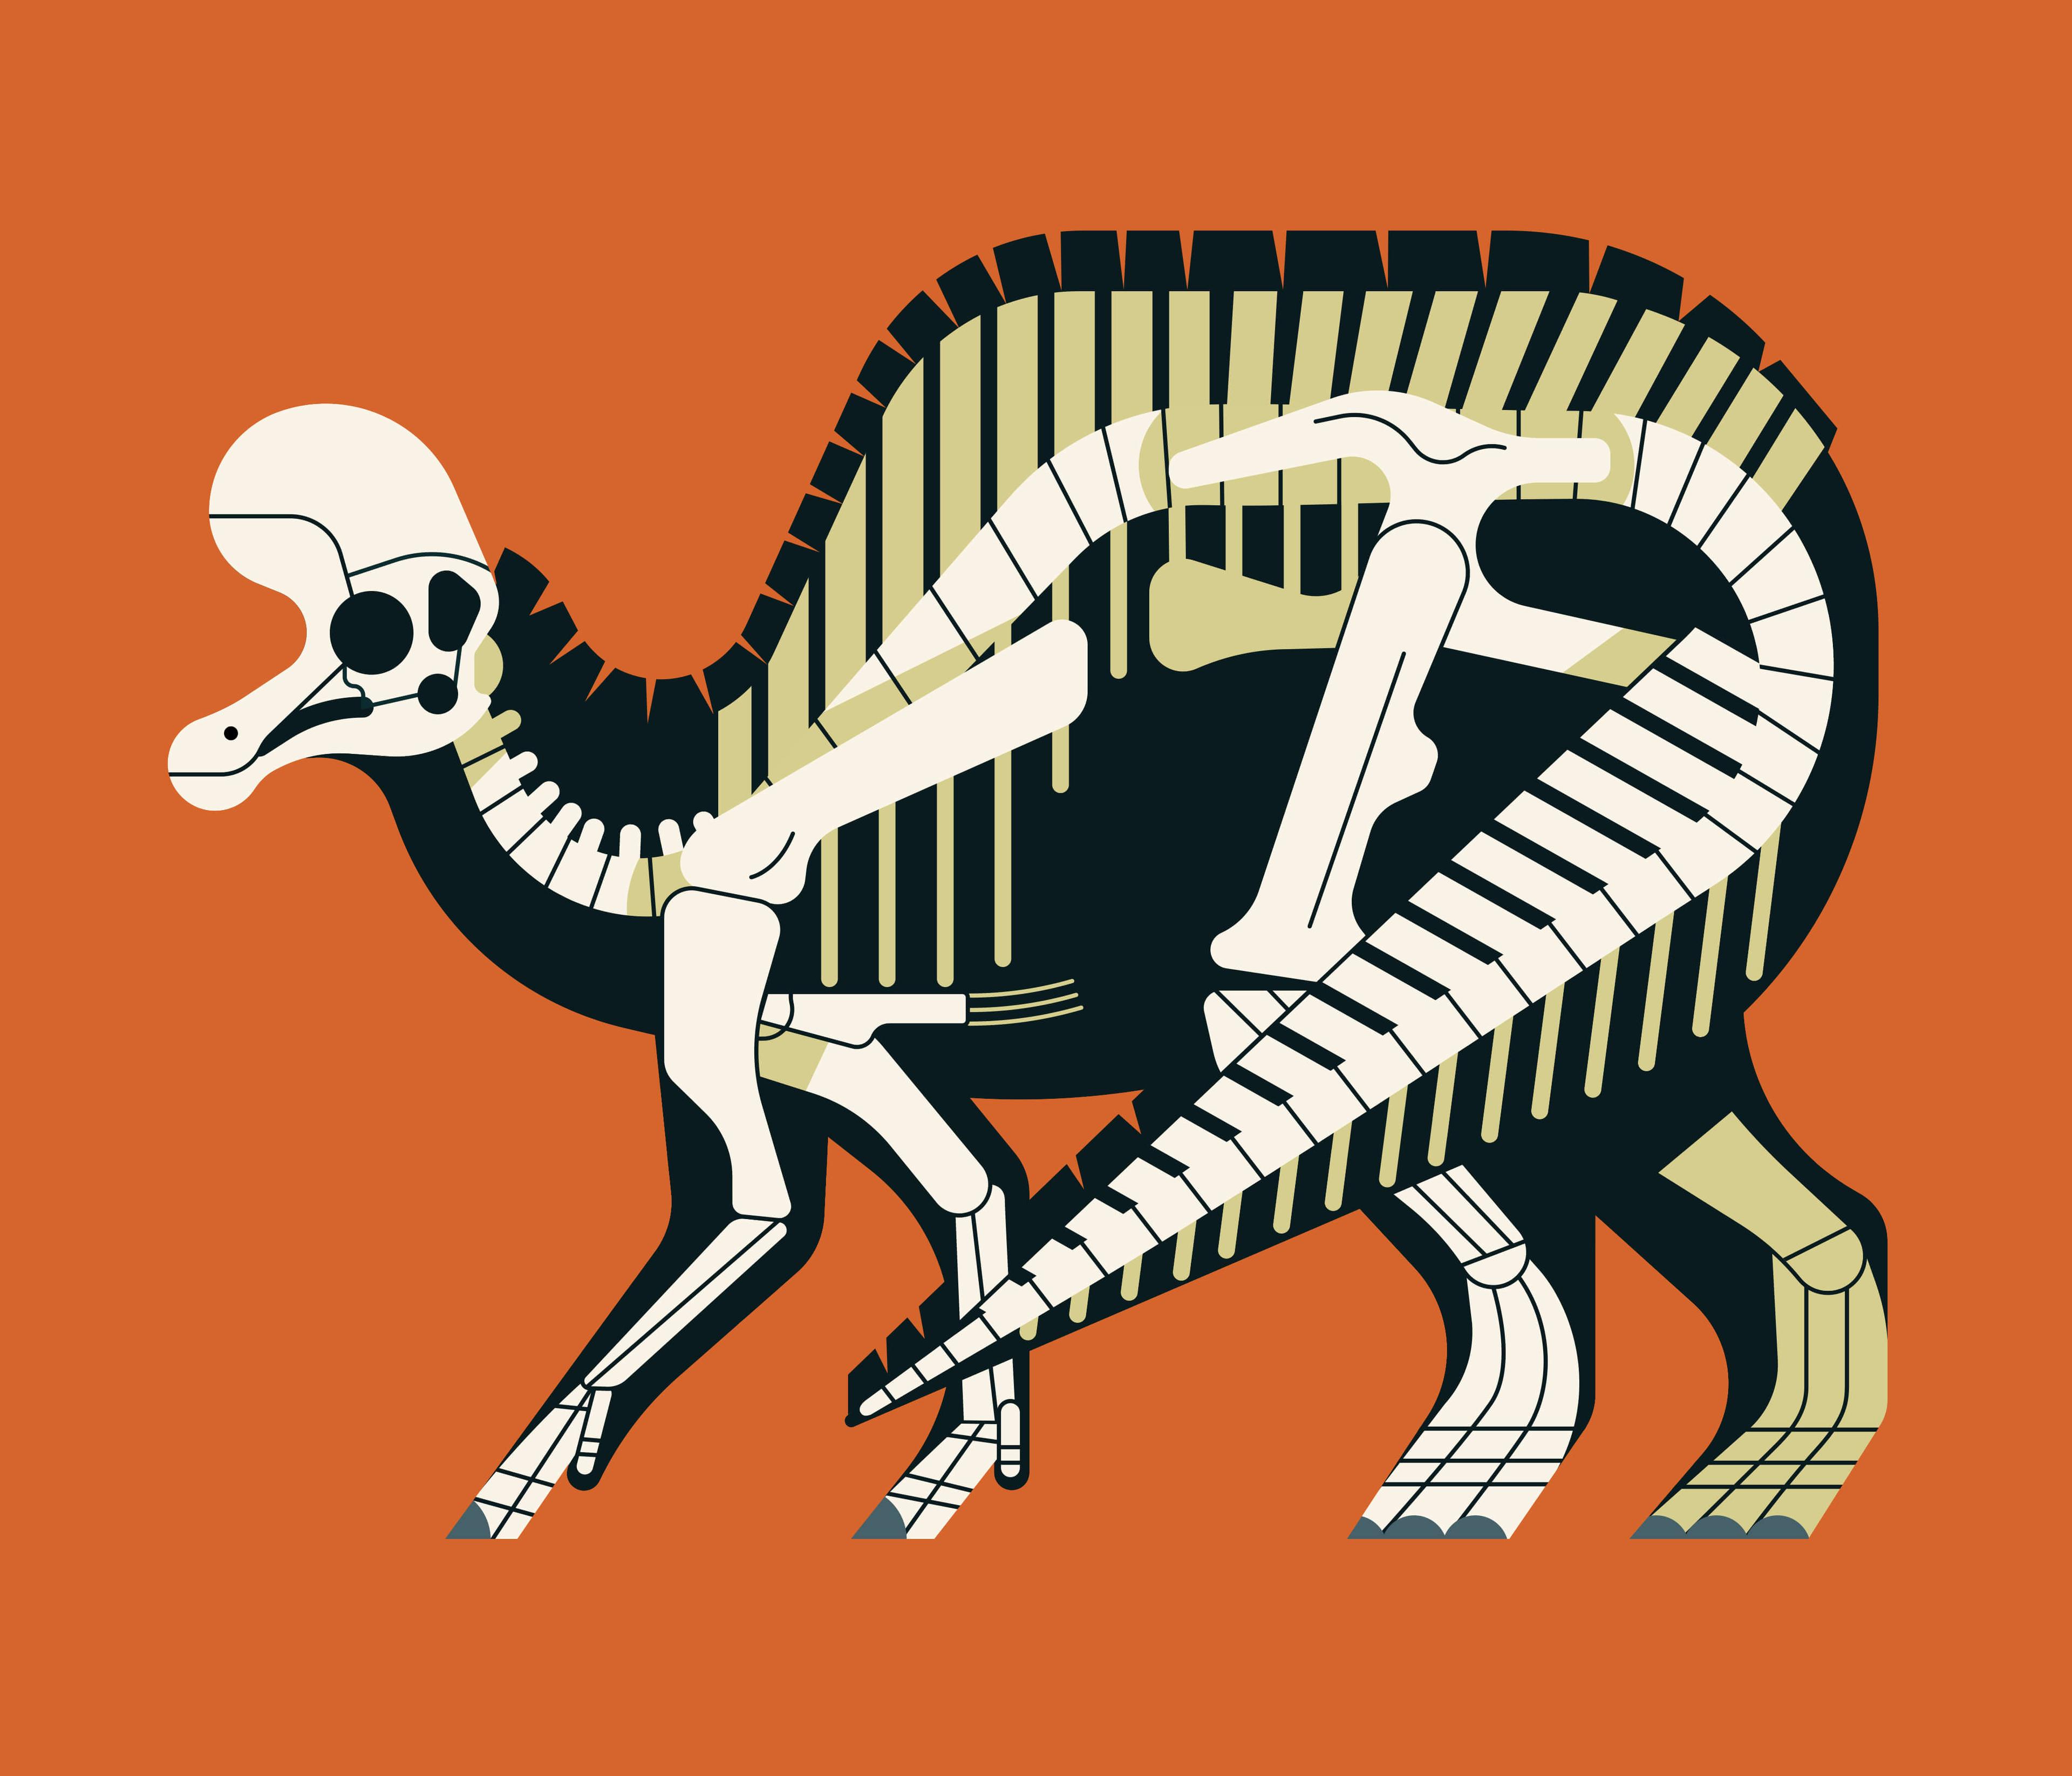 Illustration of an x-ray of a lambeosaurus dinosaur from the side, on an orange background.